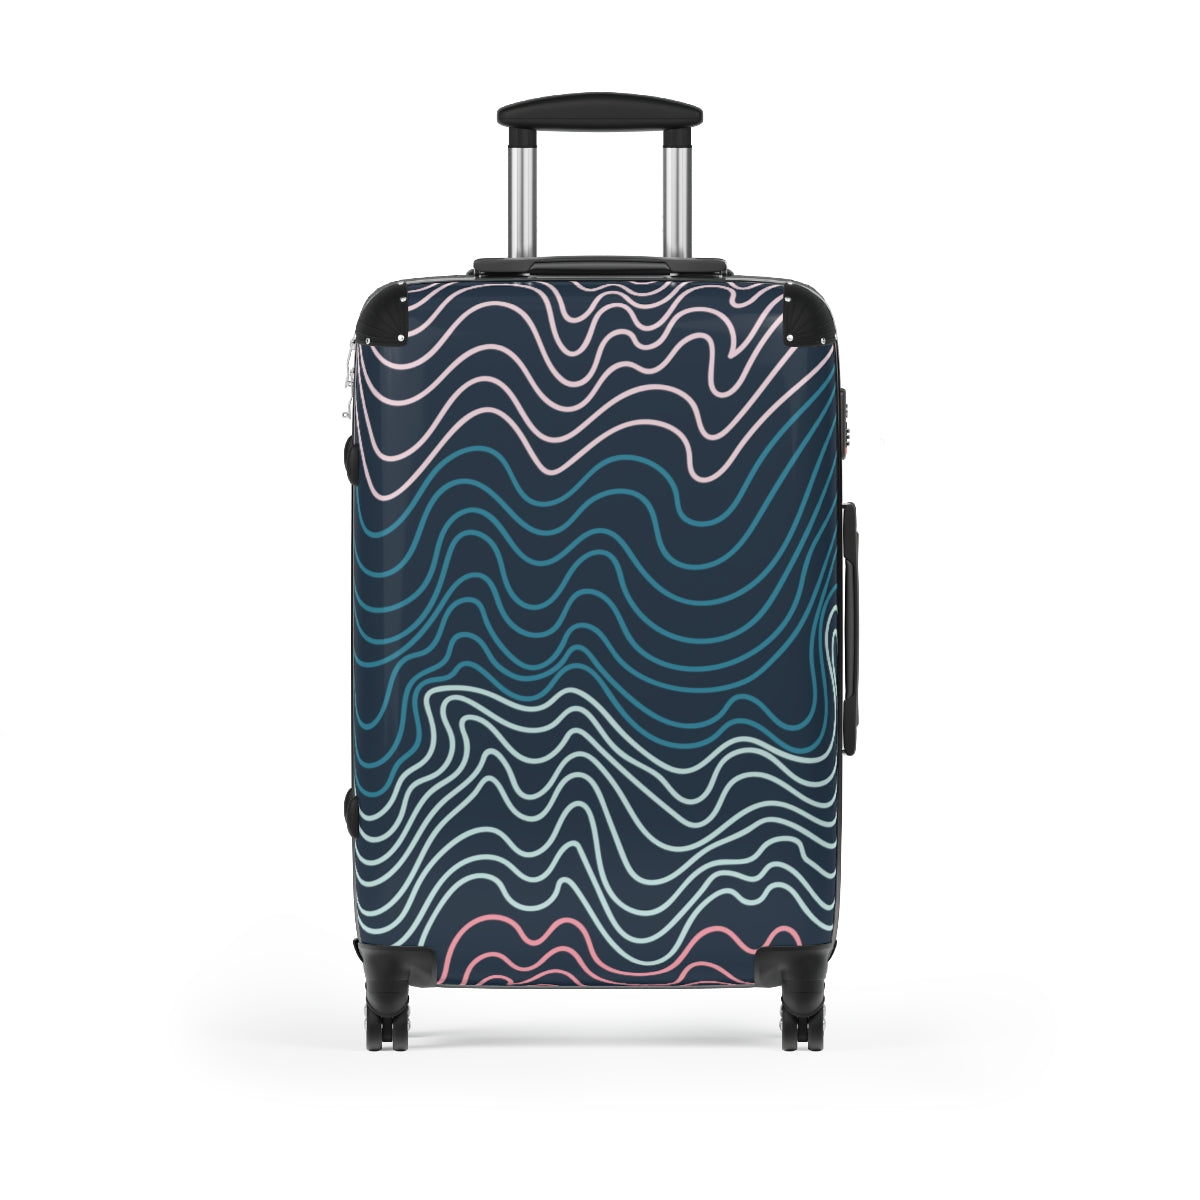  CABIN SUITCASE LUGGAGE BY ARTZIRA, BEST CARRY-ON, ALL SIZES, DOUBLE WHEELED SPINNER